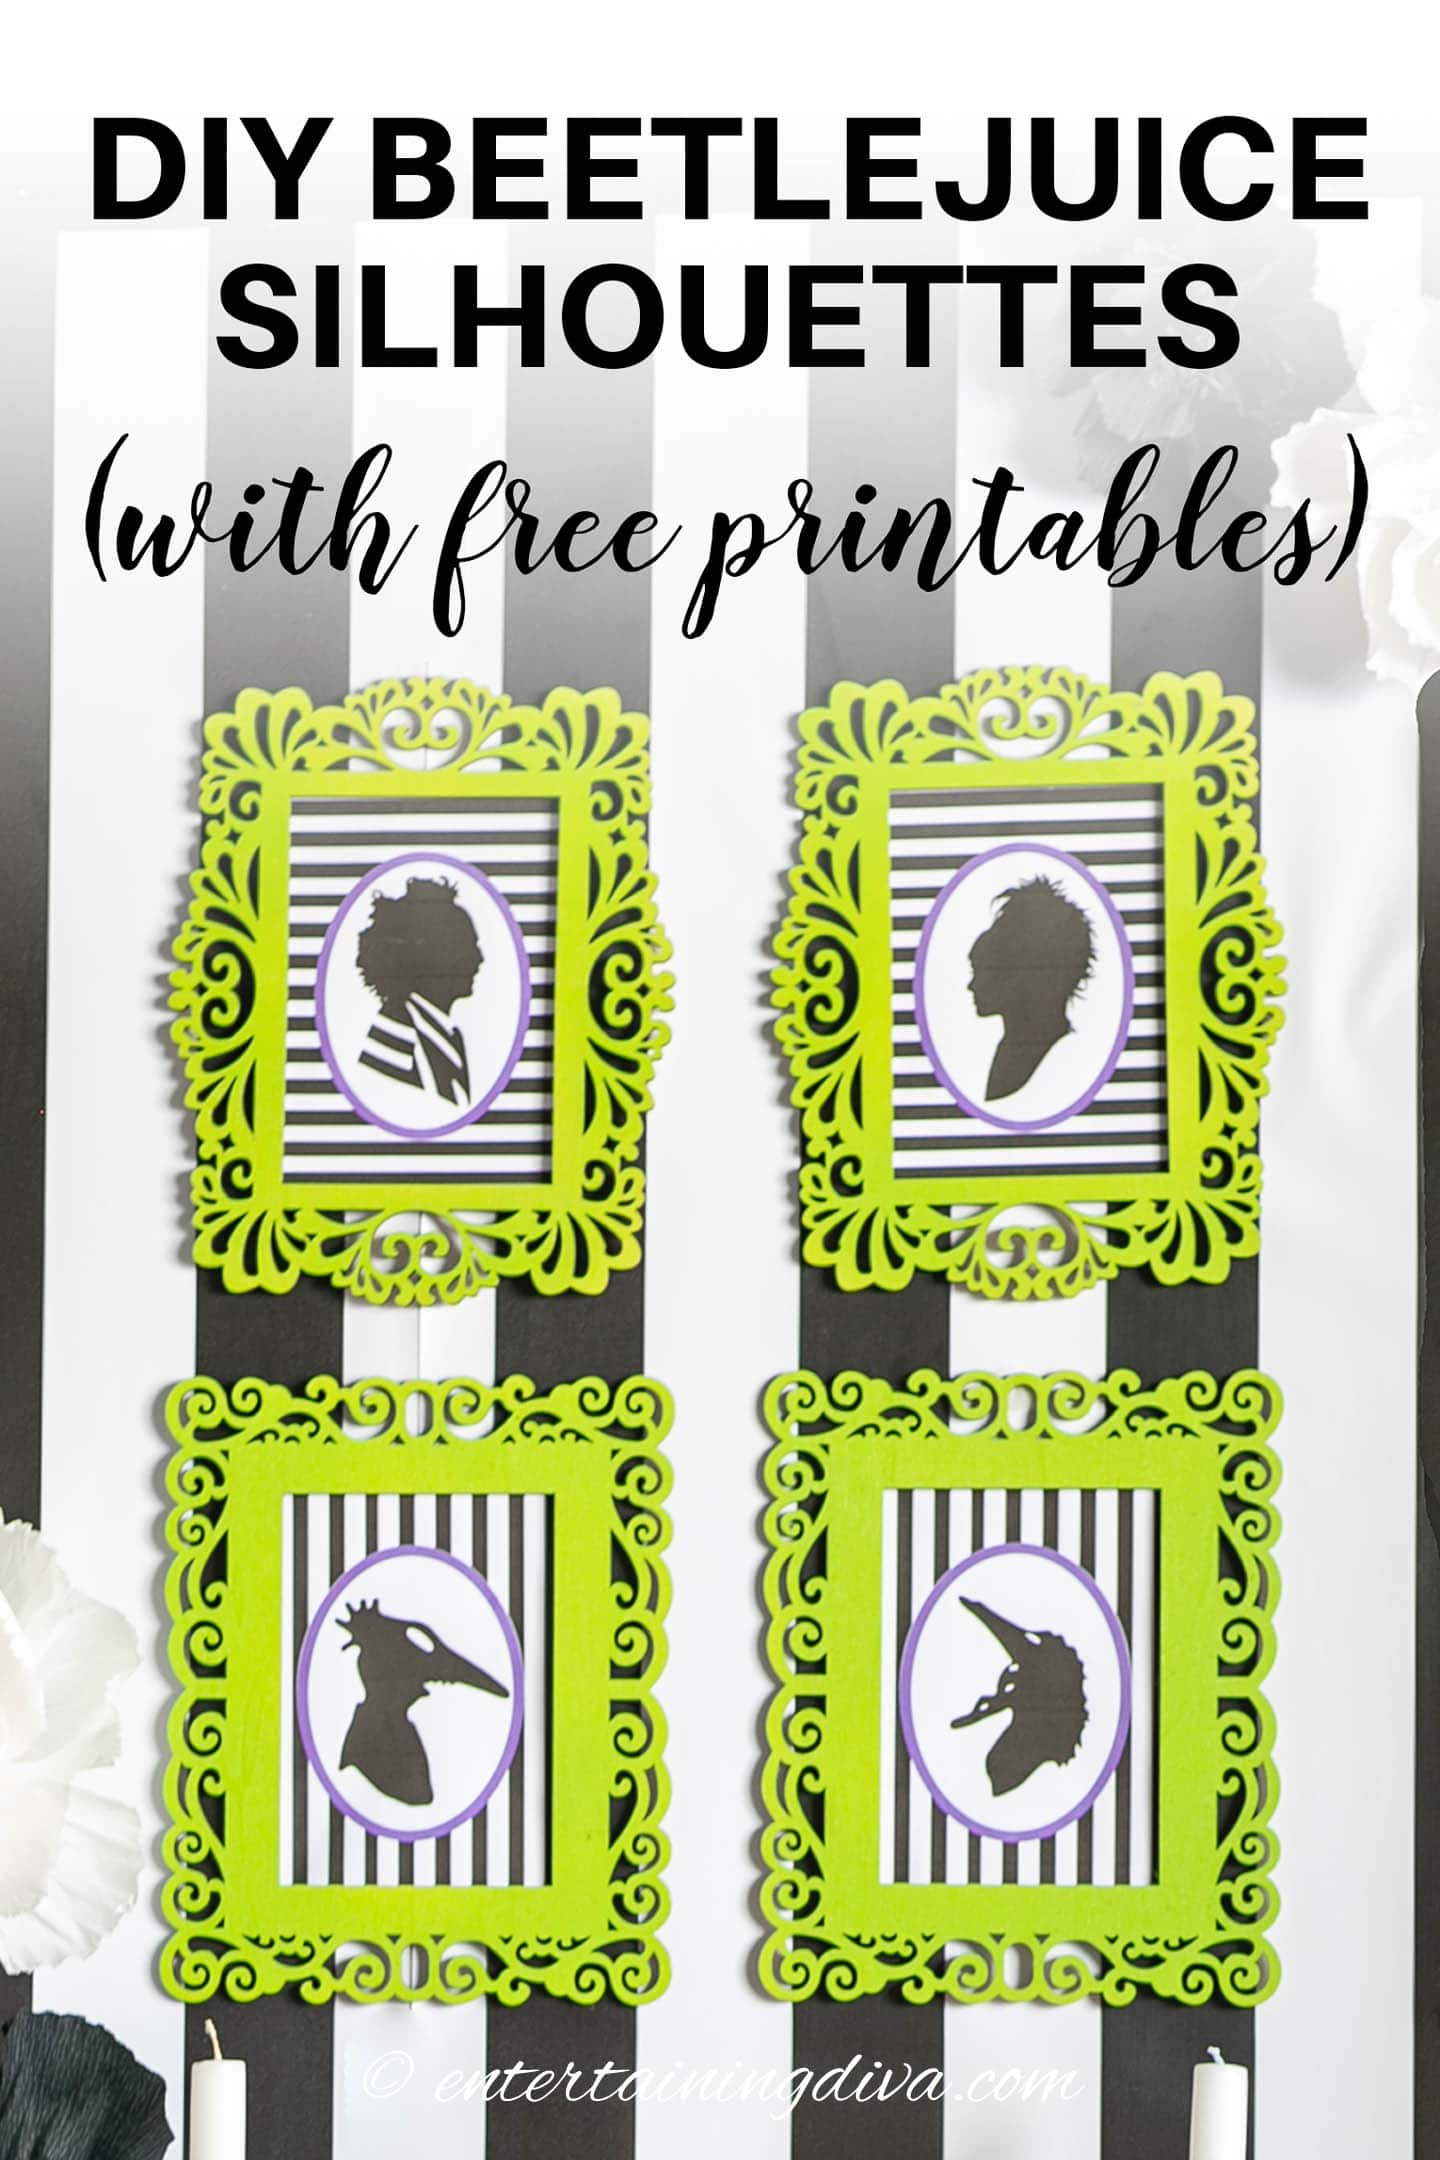 DIY Beetlejuice silhouette pictures (with free printables)